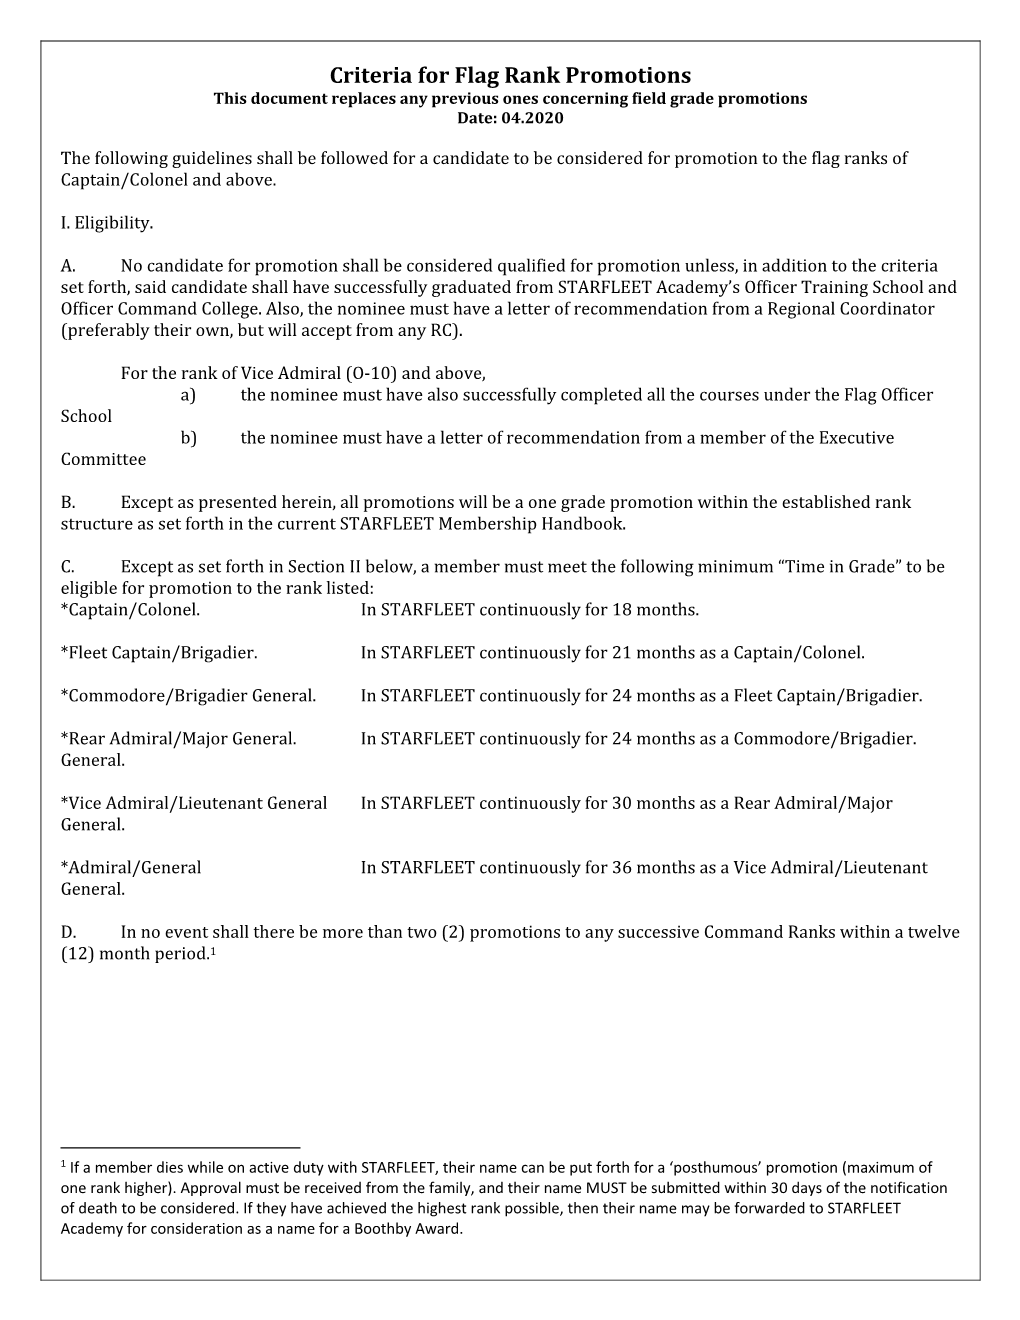 Criteria for Flag Rank Promotions This Document Replaces Any Previous Ones Concerning Field Grade Promotions Date: 04.2020